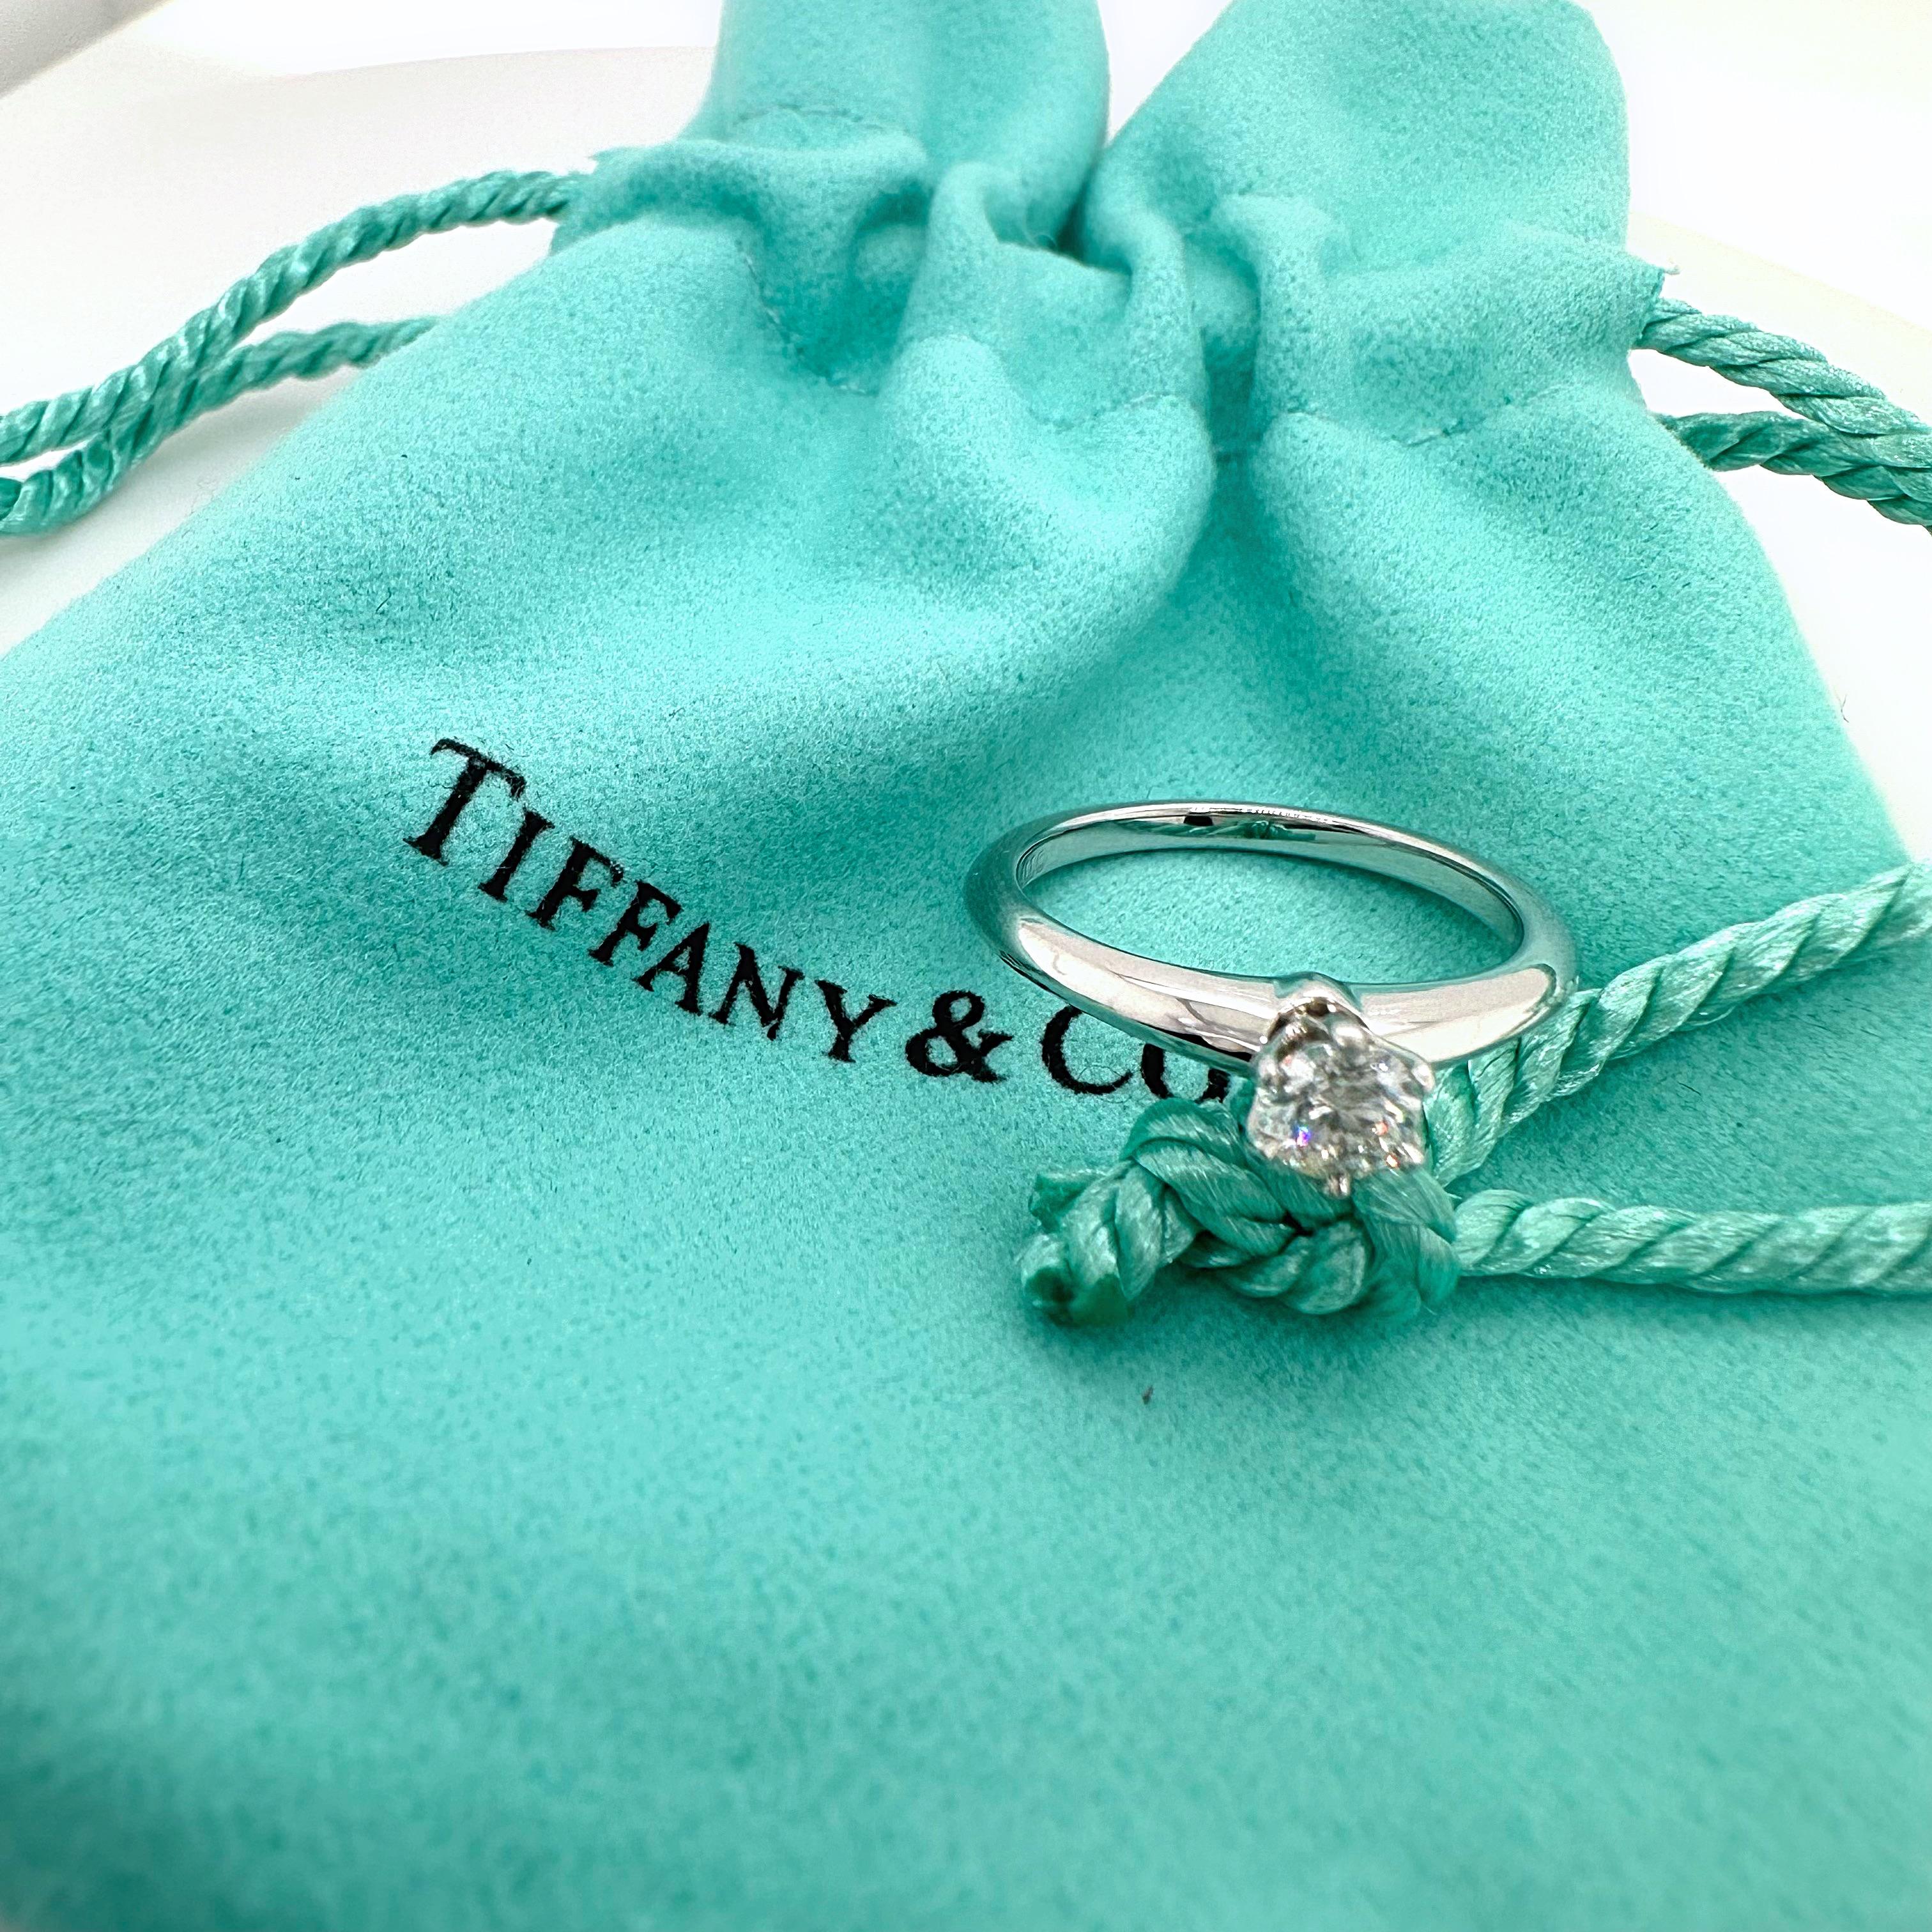 Tiffany & Co. Tiffany Setting Round Diamond Engagement Ring
Style:  Solitaire
Ref. number:  17069438
Metal:  Platinum
Size:  4.5 sizable
Measurements:  2 mm
Main Diamond:  0.19 cts
Color & Clarity:  F, VS2
Hallmark:  ©TIFFANY&CO. PT950 17069438 .19